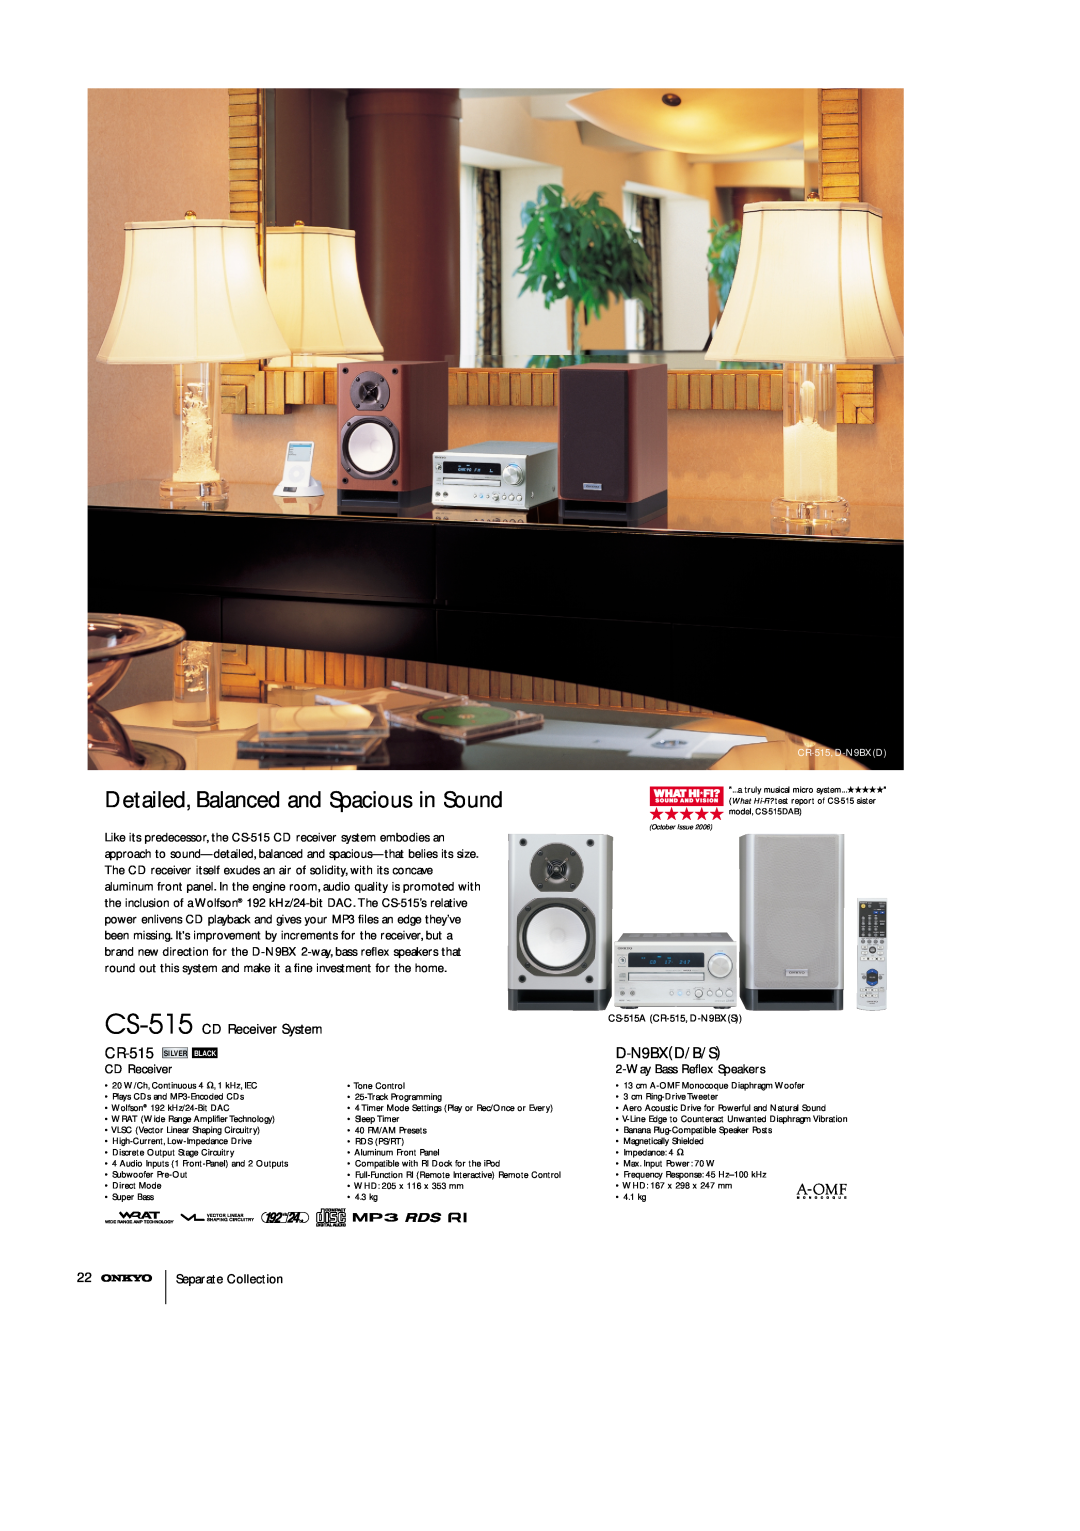 Onkyo T-4211 Detailed, Balanced and Spacious in Sound, CS-515 CD Receiver System, CR-515, D-N9BXD/B/S, Separate Collection 